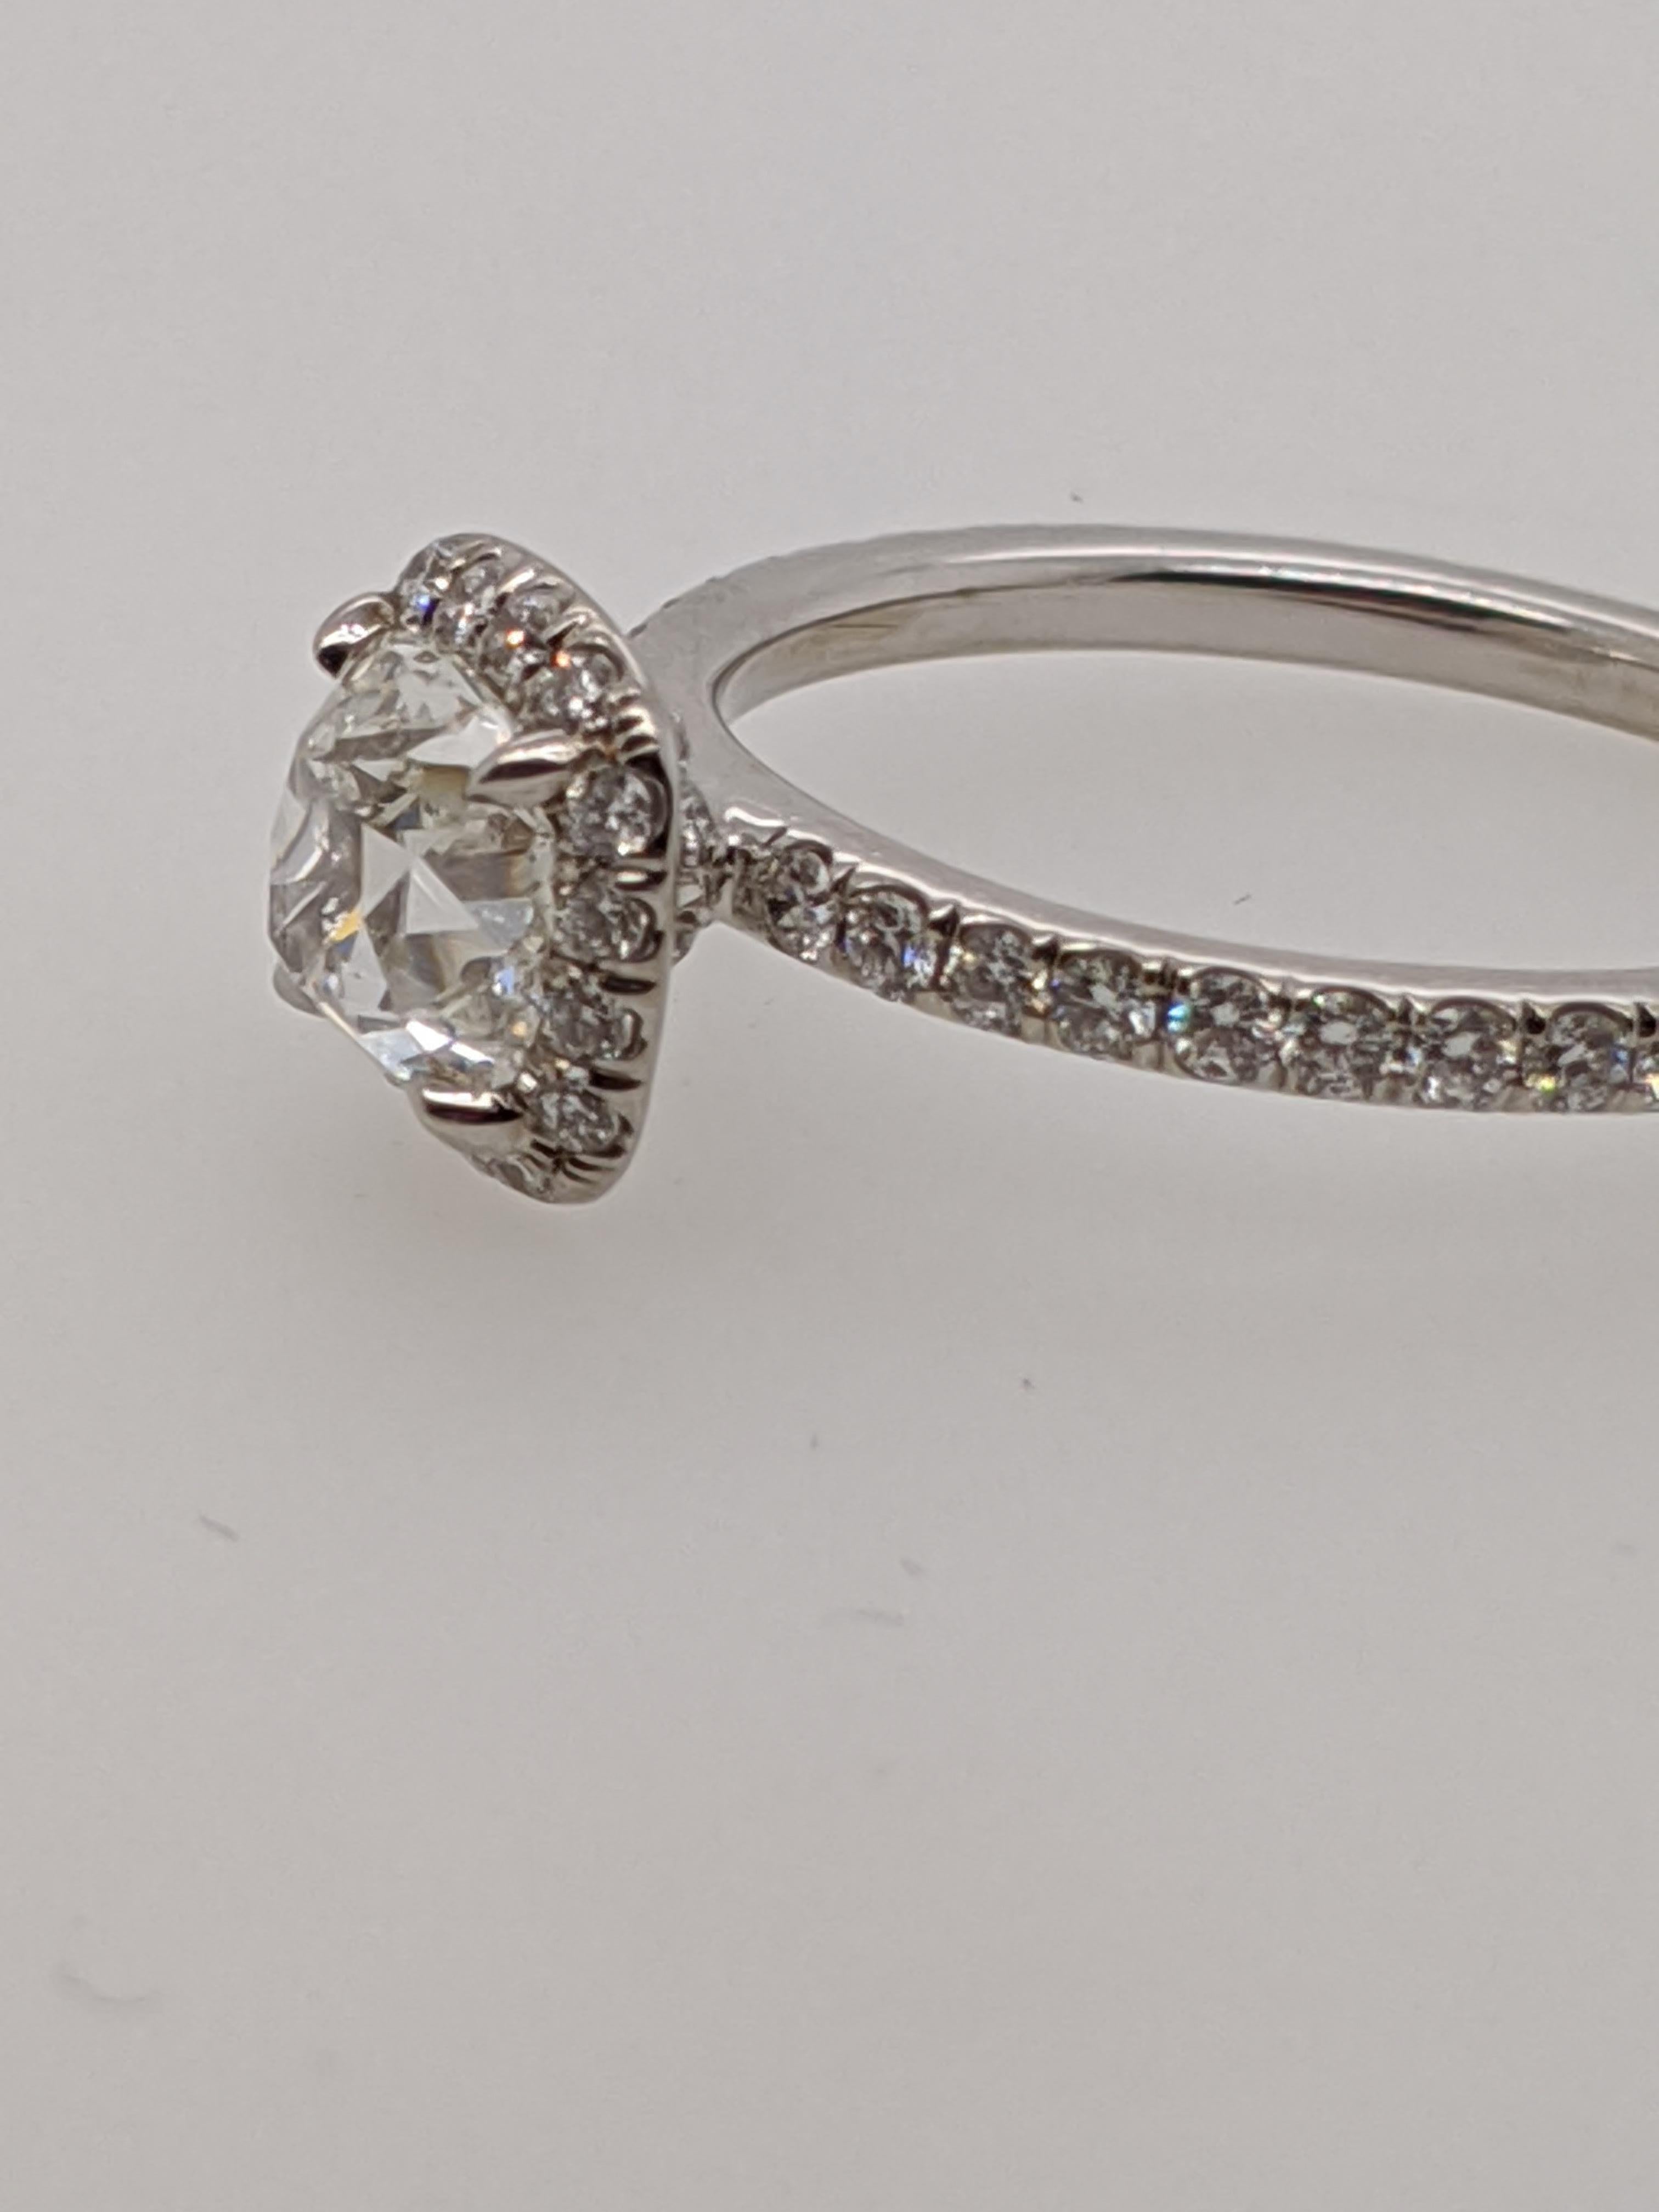 Classic  white halo ring handmade in the United States.  Featuring a one carat or larger antique style cushion cut diamond with GIA grading report. This listing has one of hundreds of cushion cut diamonds in our office and we are happy to create a